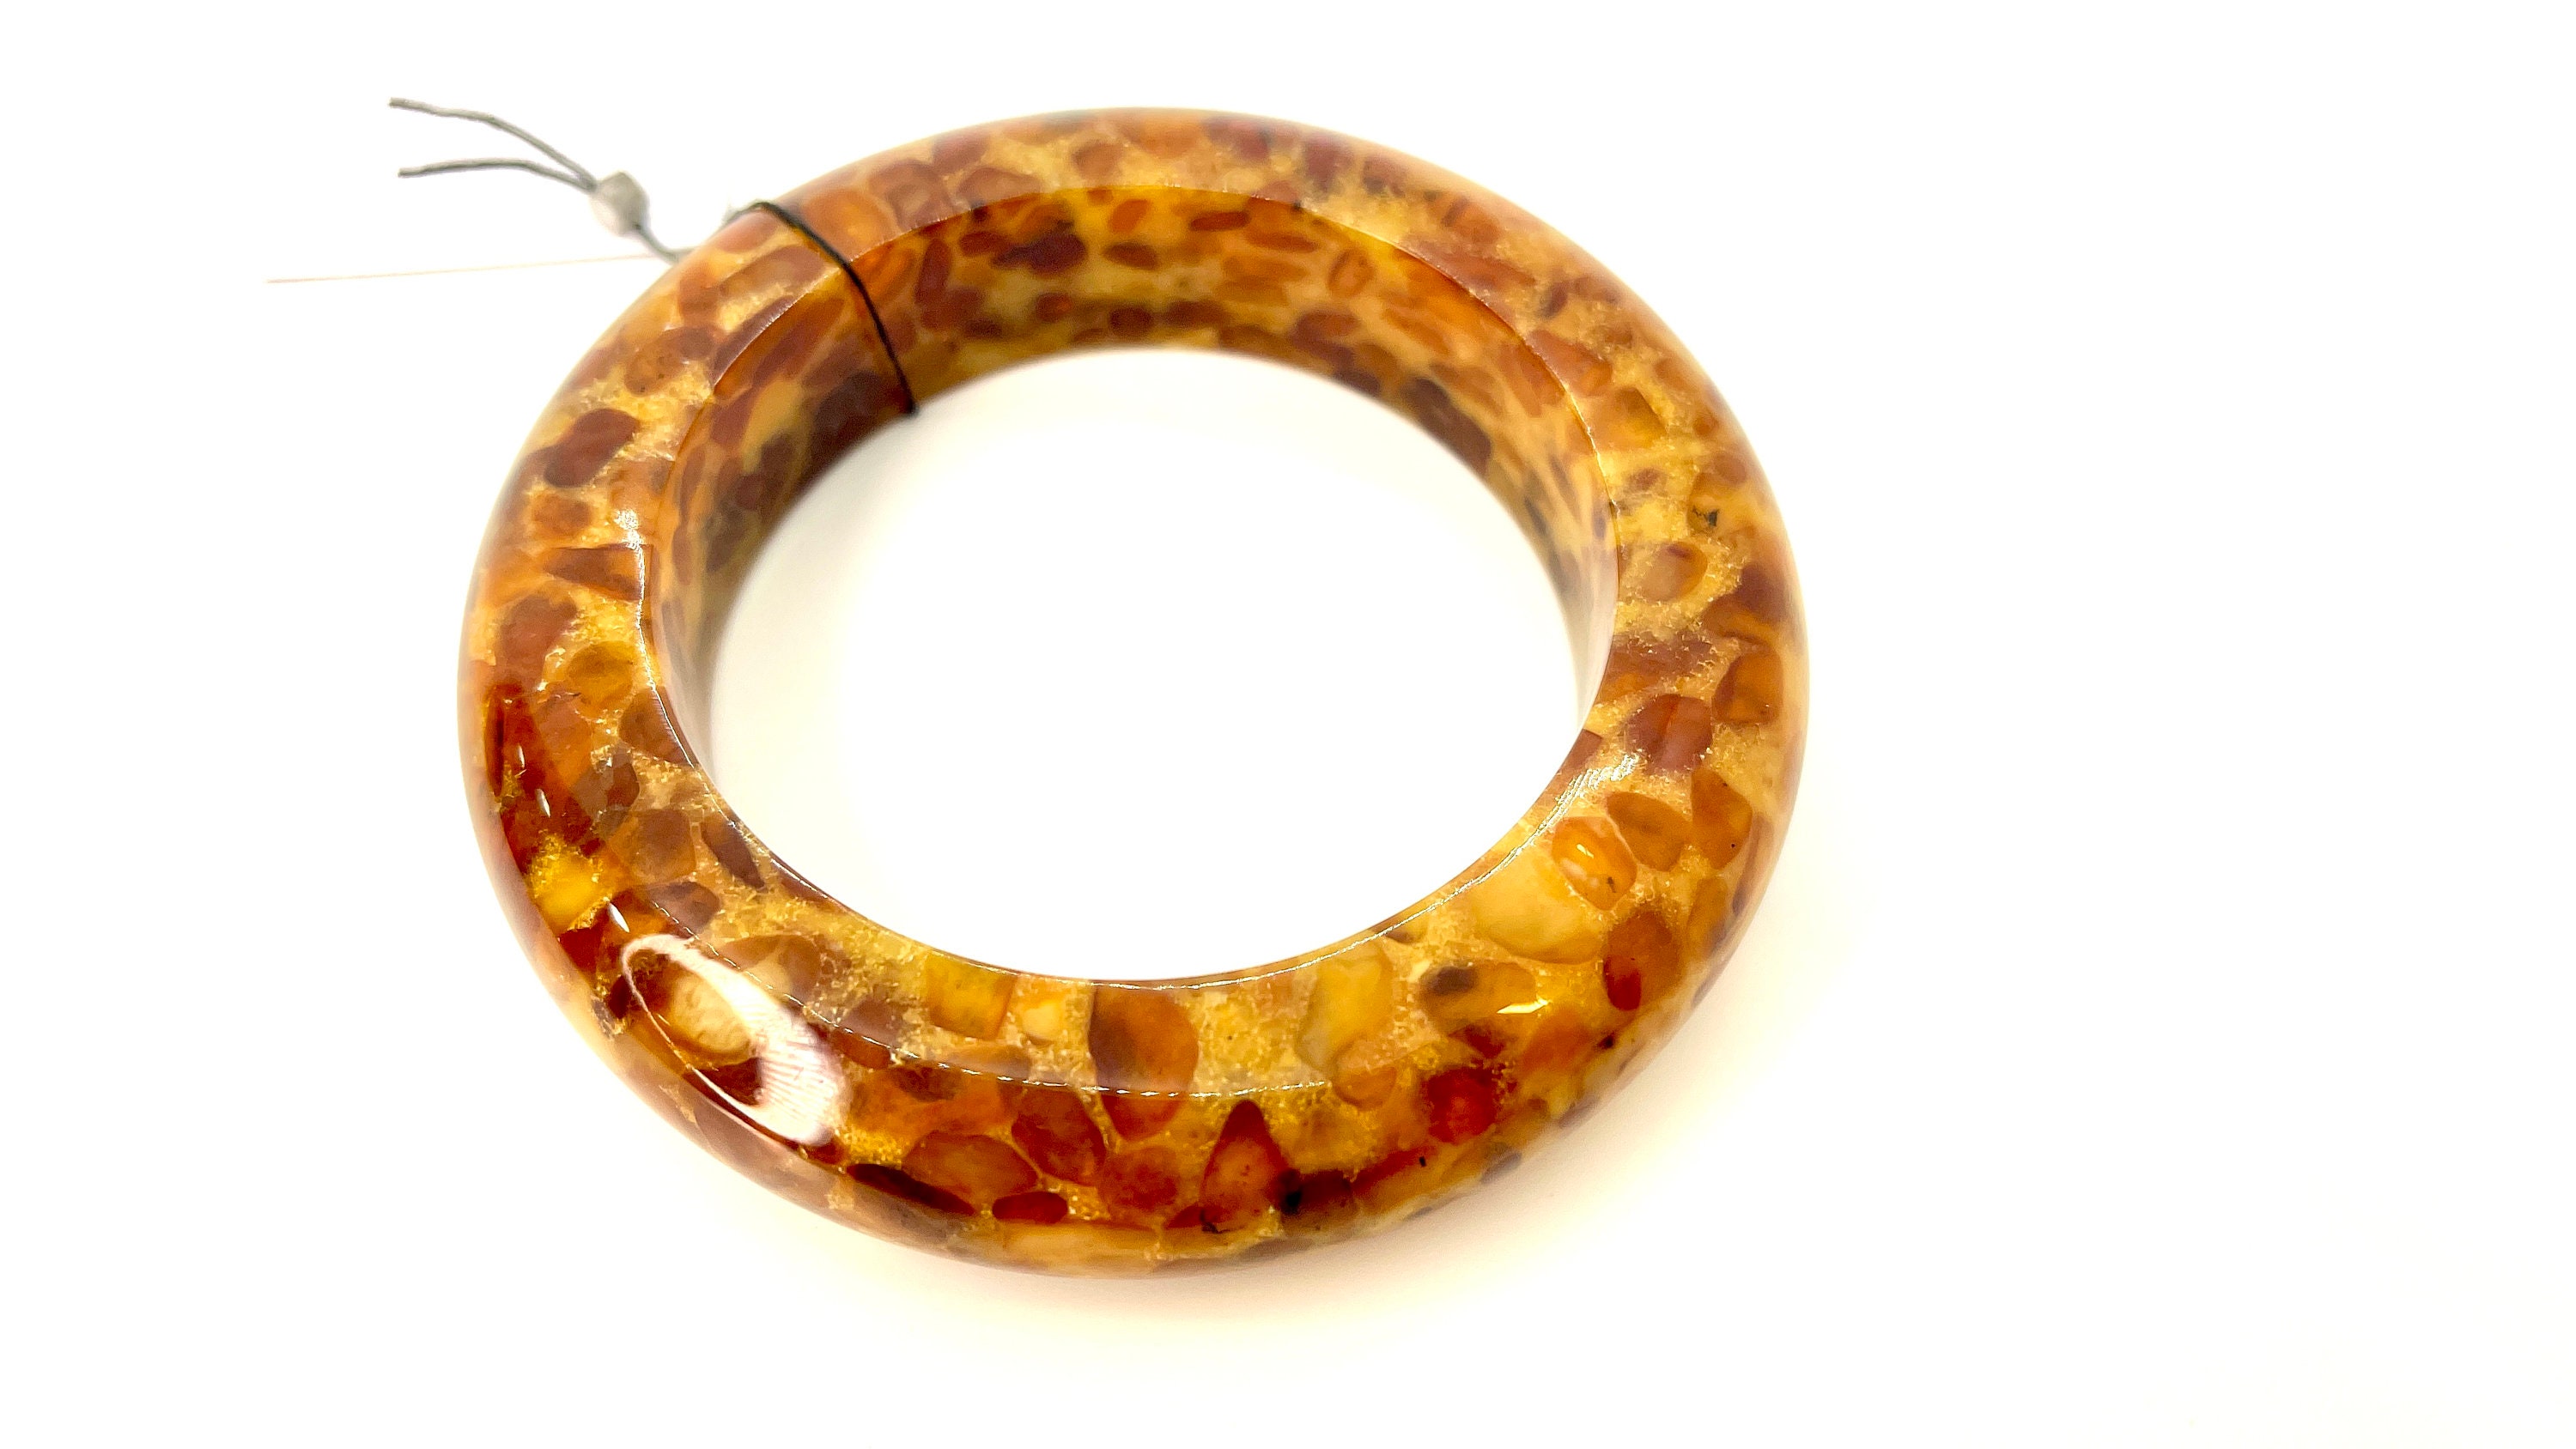 13.8 Inches Genuine Amber Necklace from Baltic Sea Made with Unpolished Mixed 35 cm 